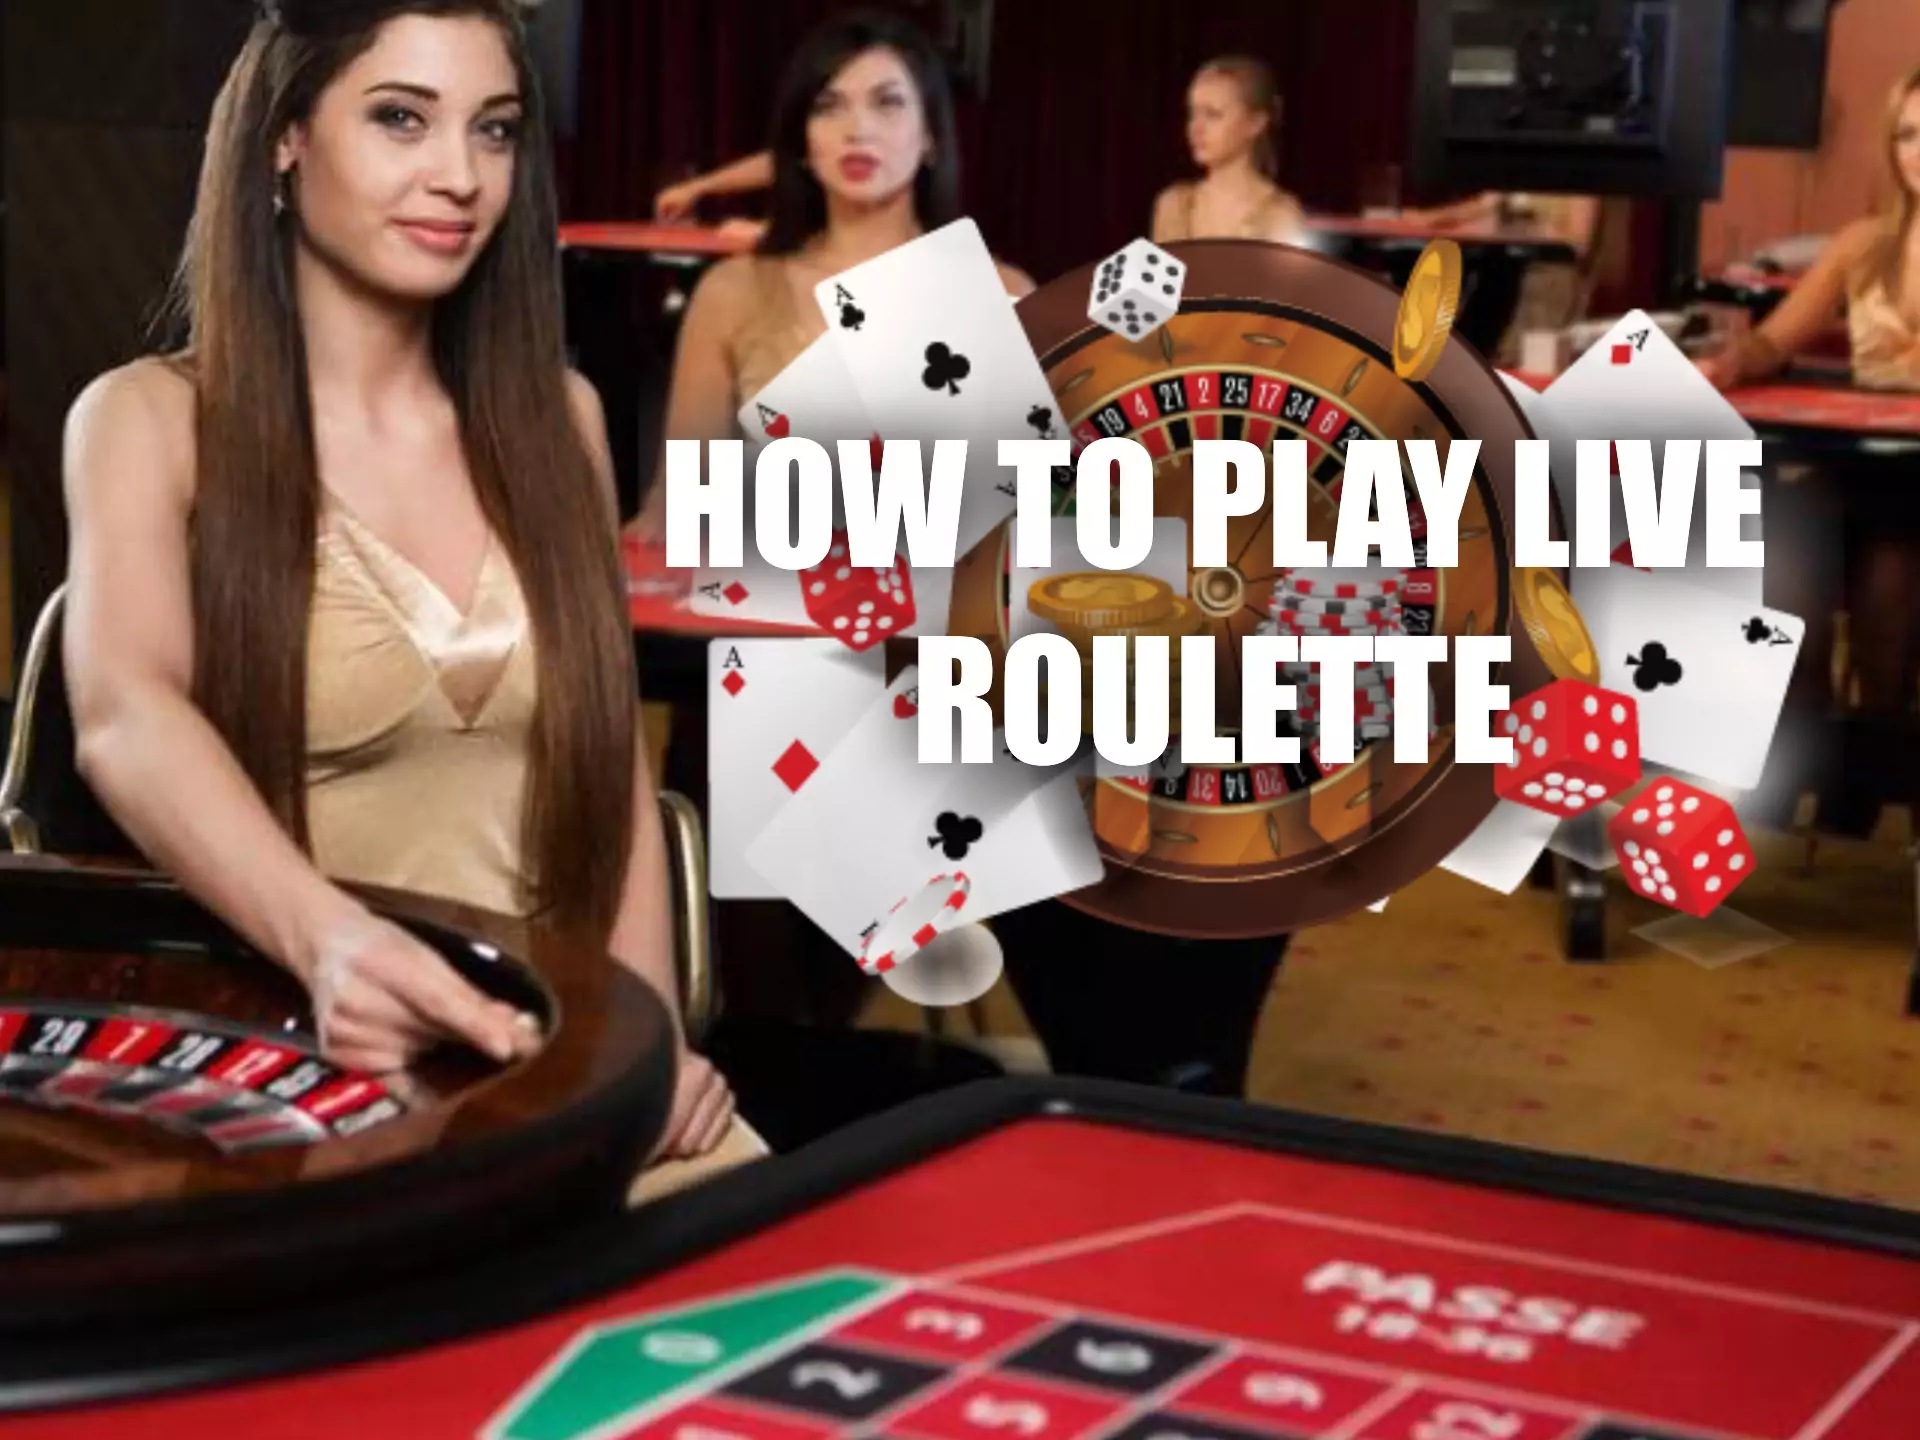 After winning at a live roulette, withdraw money from the online casino.